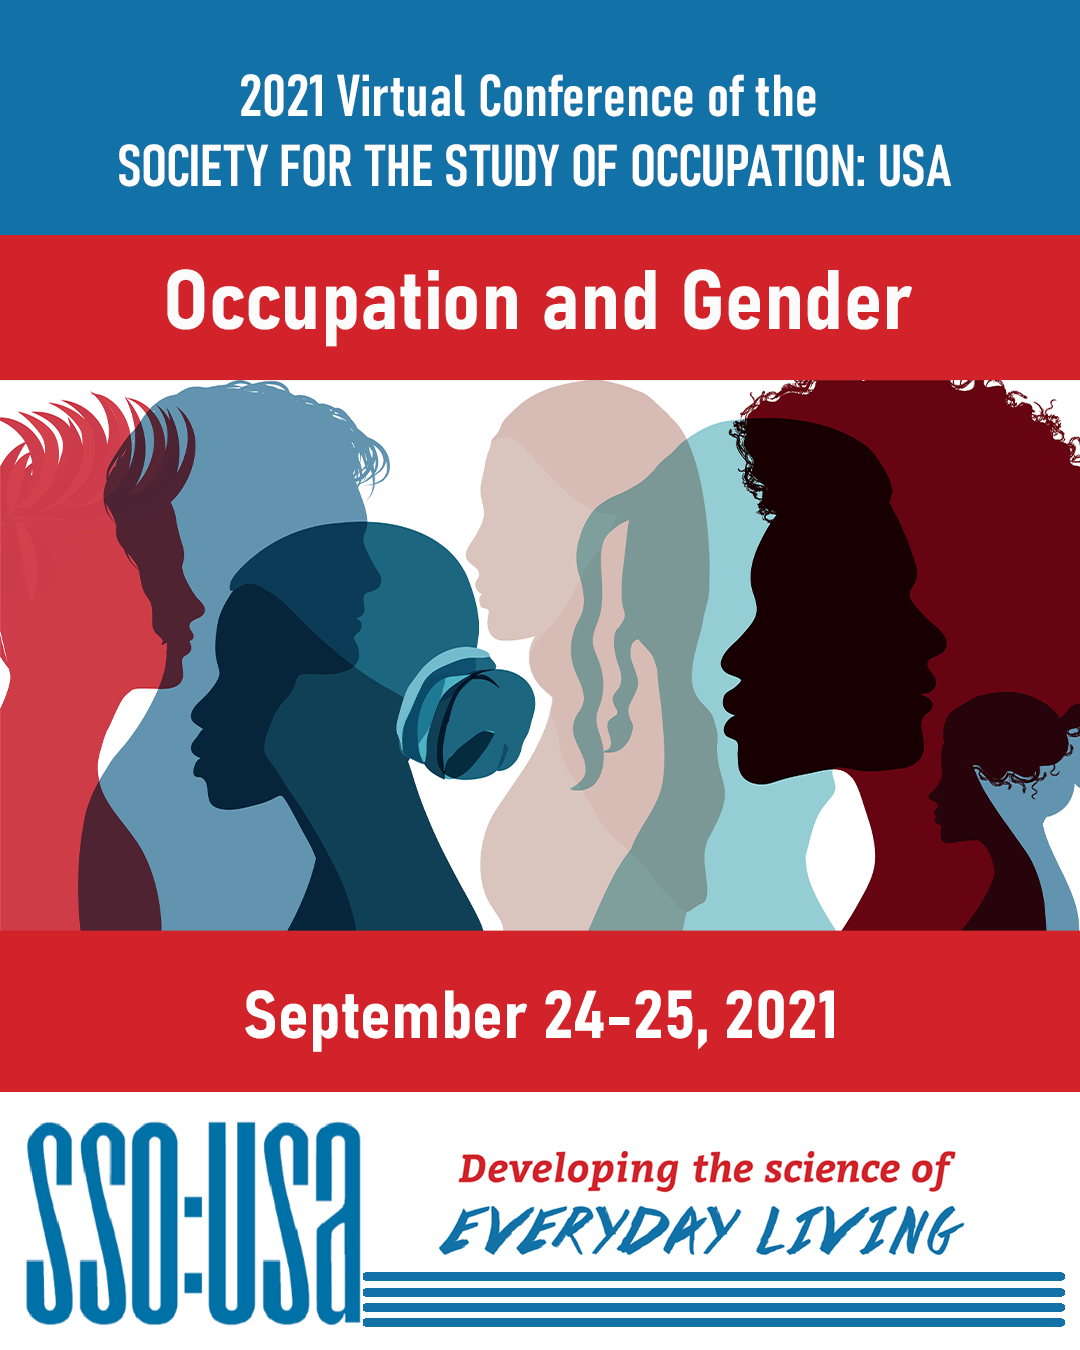 2021 Vitrual Conference: Occupation and Gender